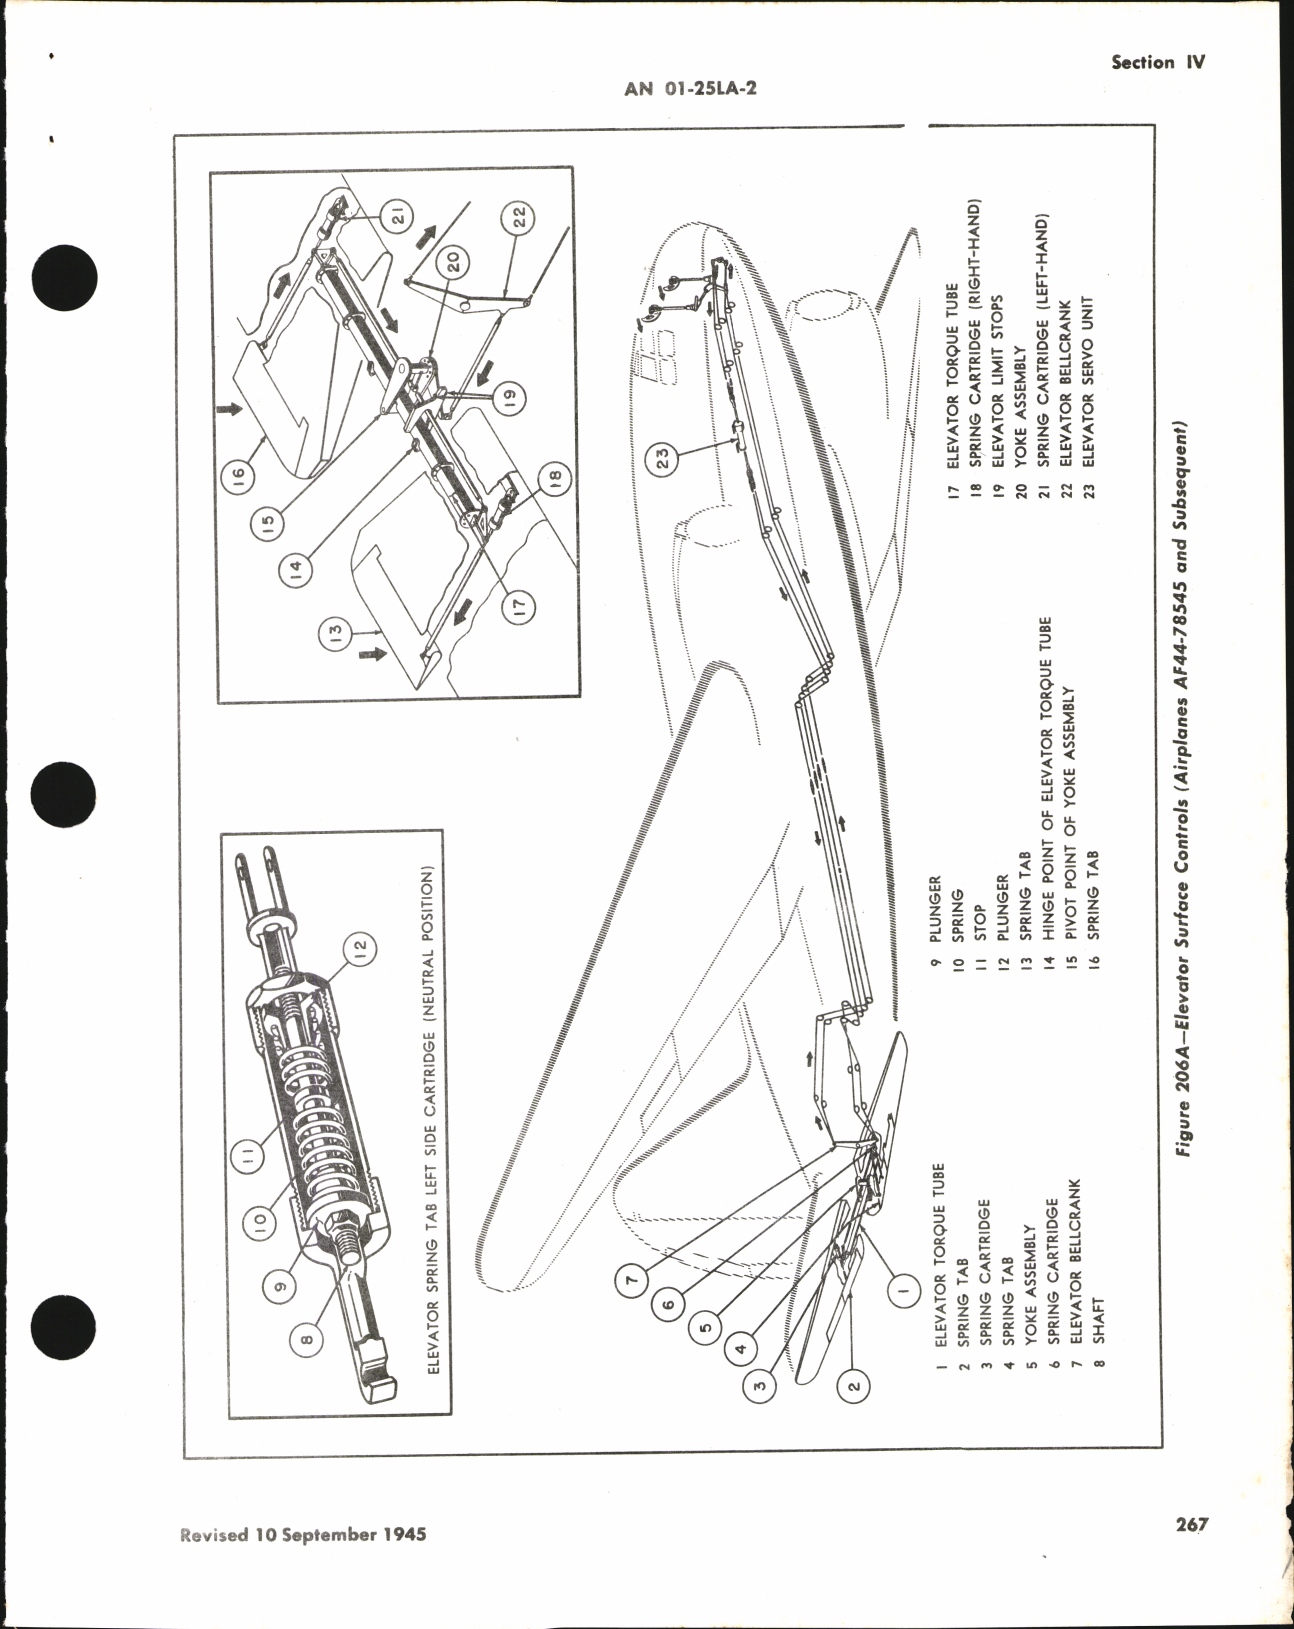 Sample page 7 from AirCorps Library document: Maintenance Instructions for C-46, ZC-46A, C-46D, C-46F, and R5C-1